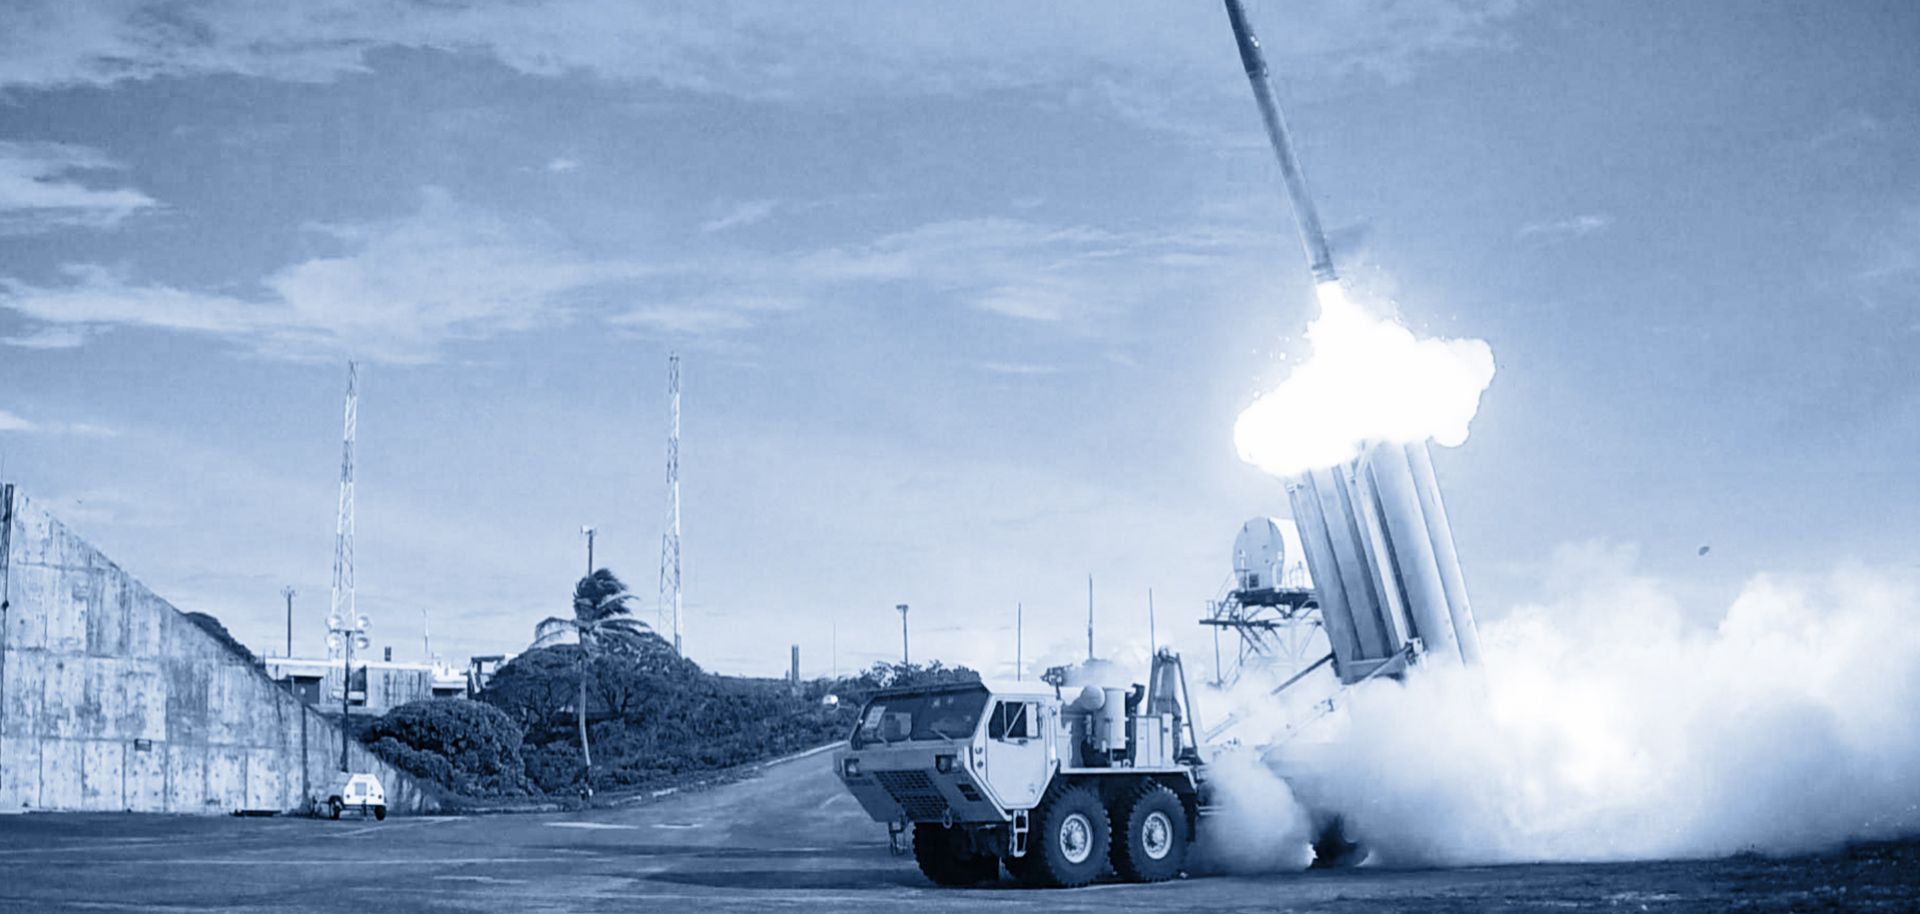 South Korea is considering allowing for deployment of two U.S. Terminal High Altitude Area Defense (THAAD) interceptors.